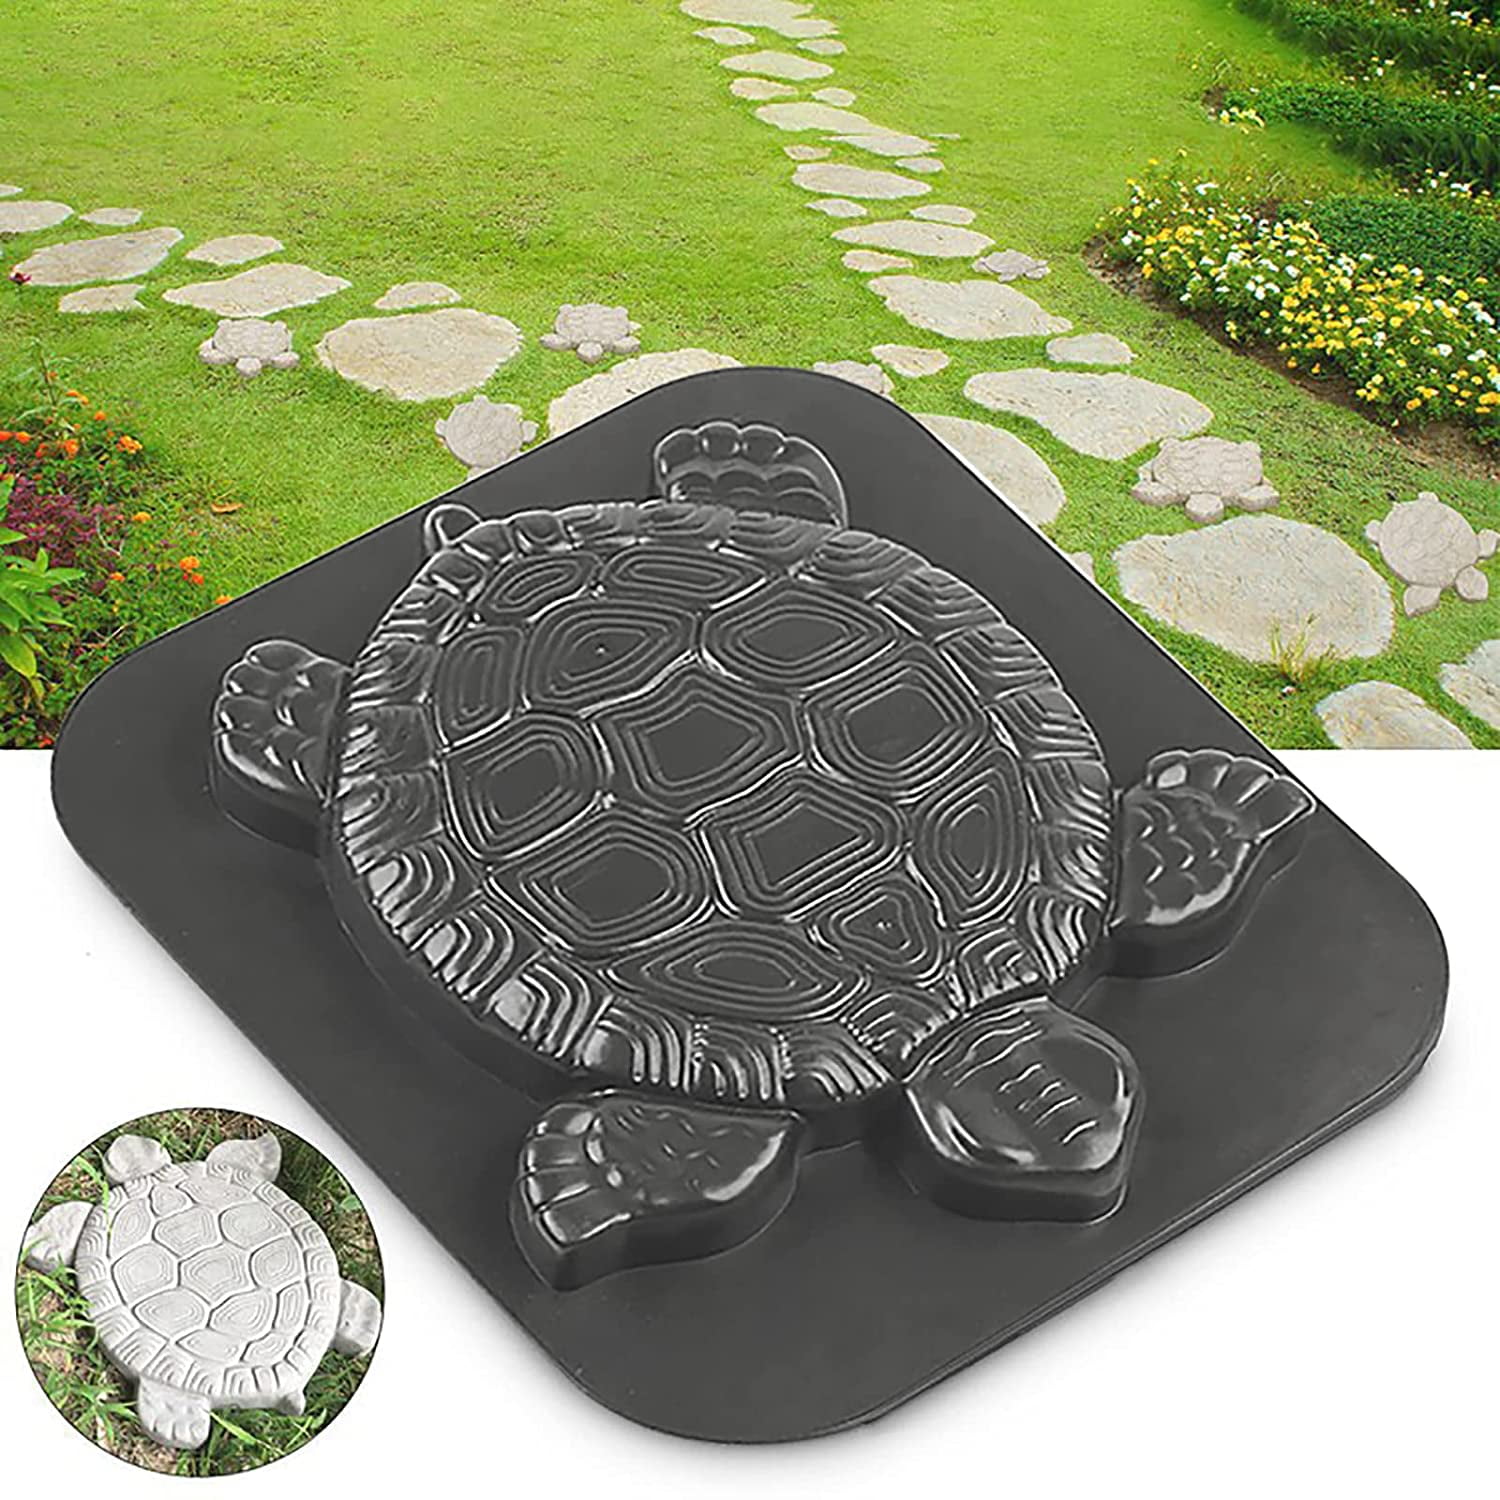 Slate tile concrete plaster stepping stone mold mould..16" x 16" x 1" thick 